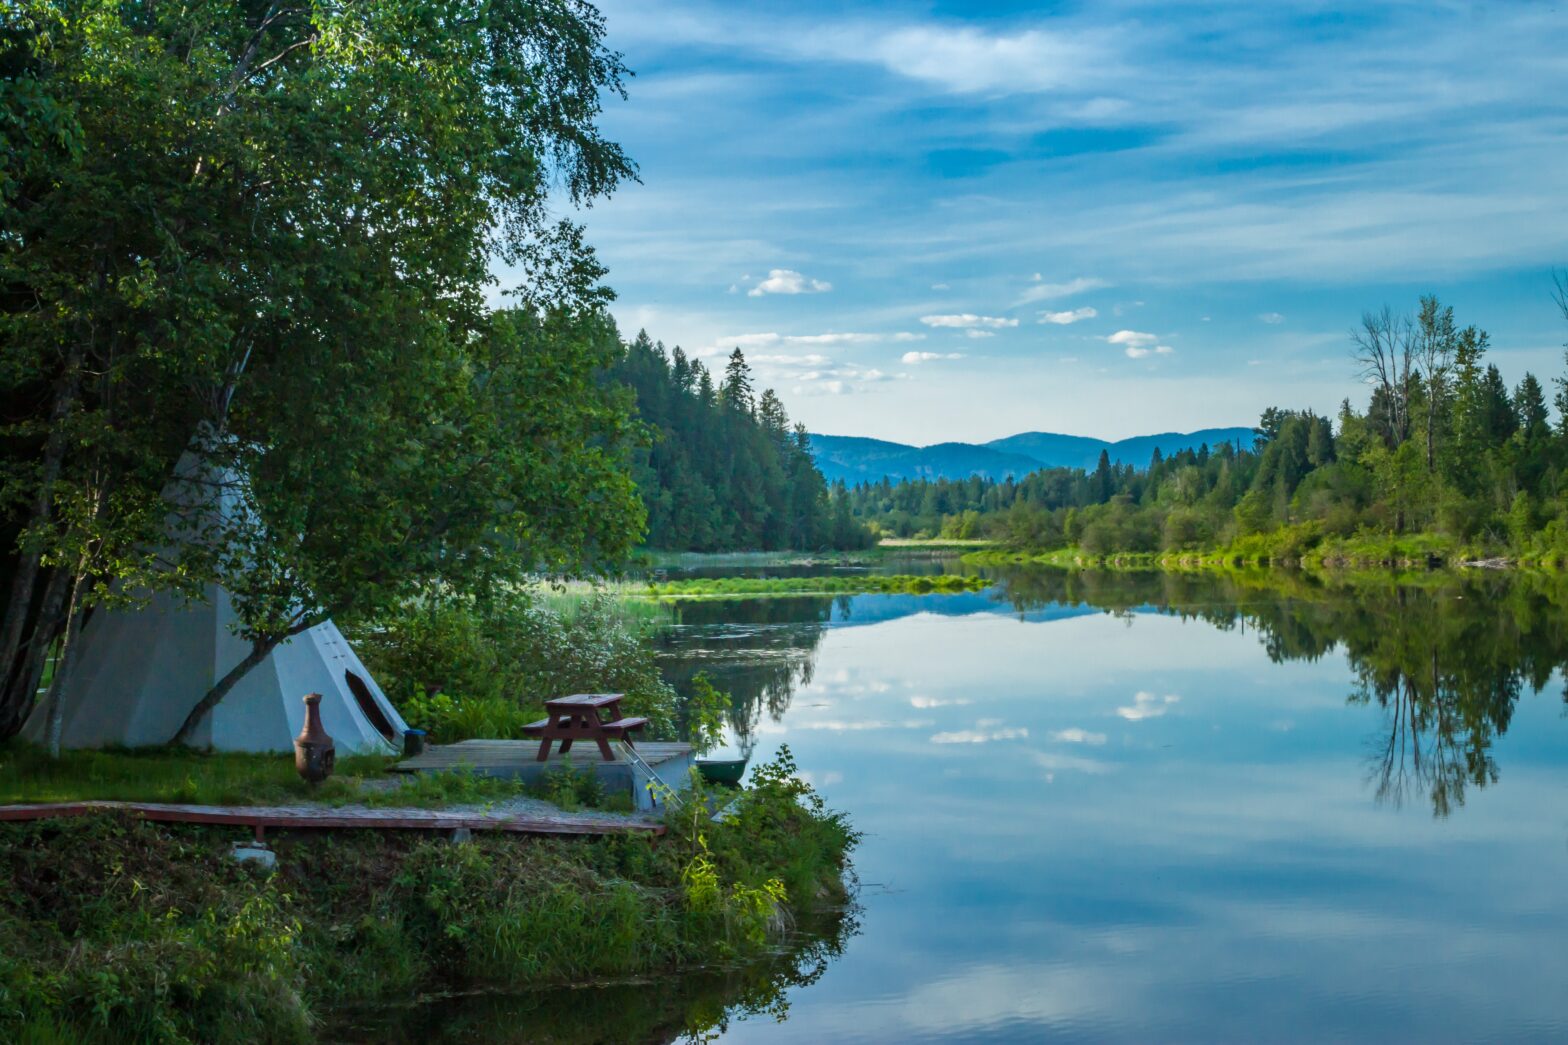 Luxury Camping Sites To Check Out in the United States